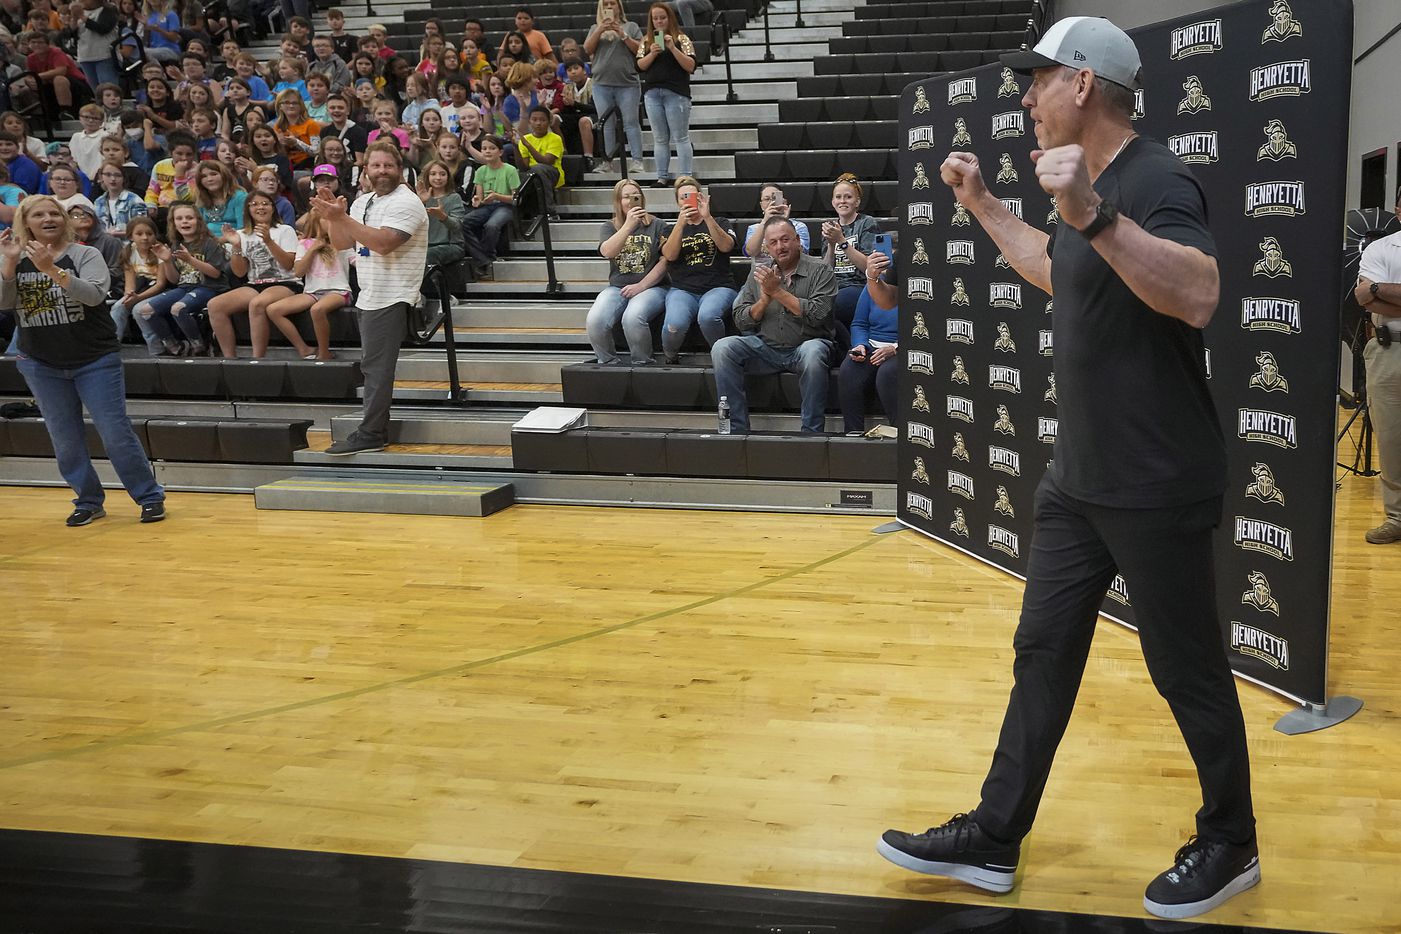 Troy Aikman walks into the gymnasium to surprise students during a pep rally at Henryetta High School.